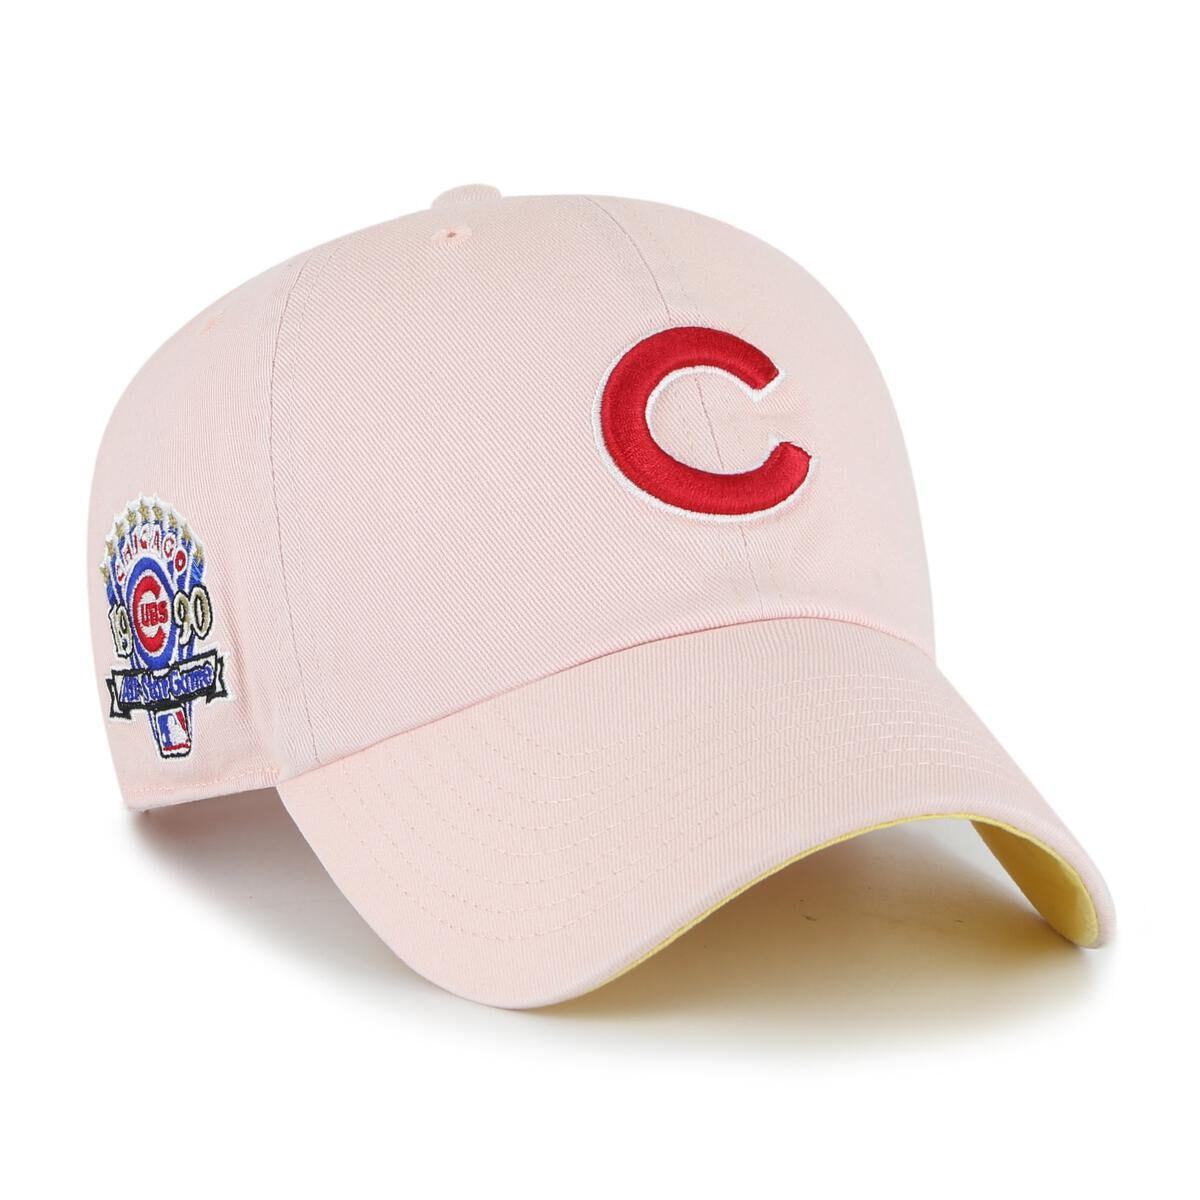 MLB Chicago Cubs Double Under Snapback - reconzrh